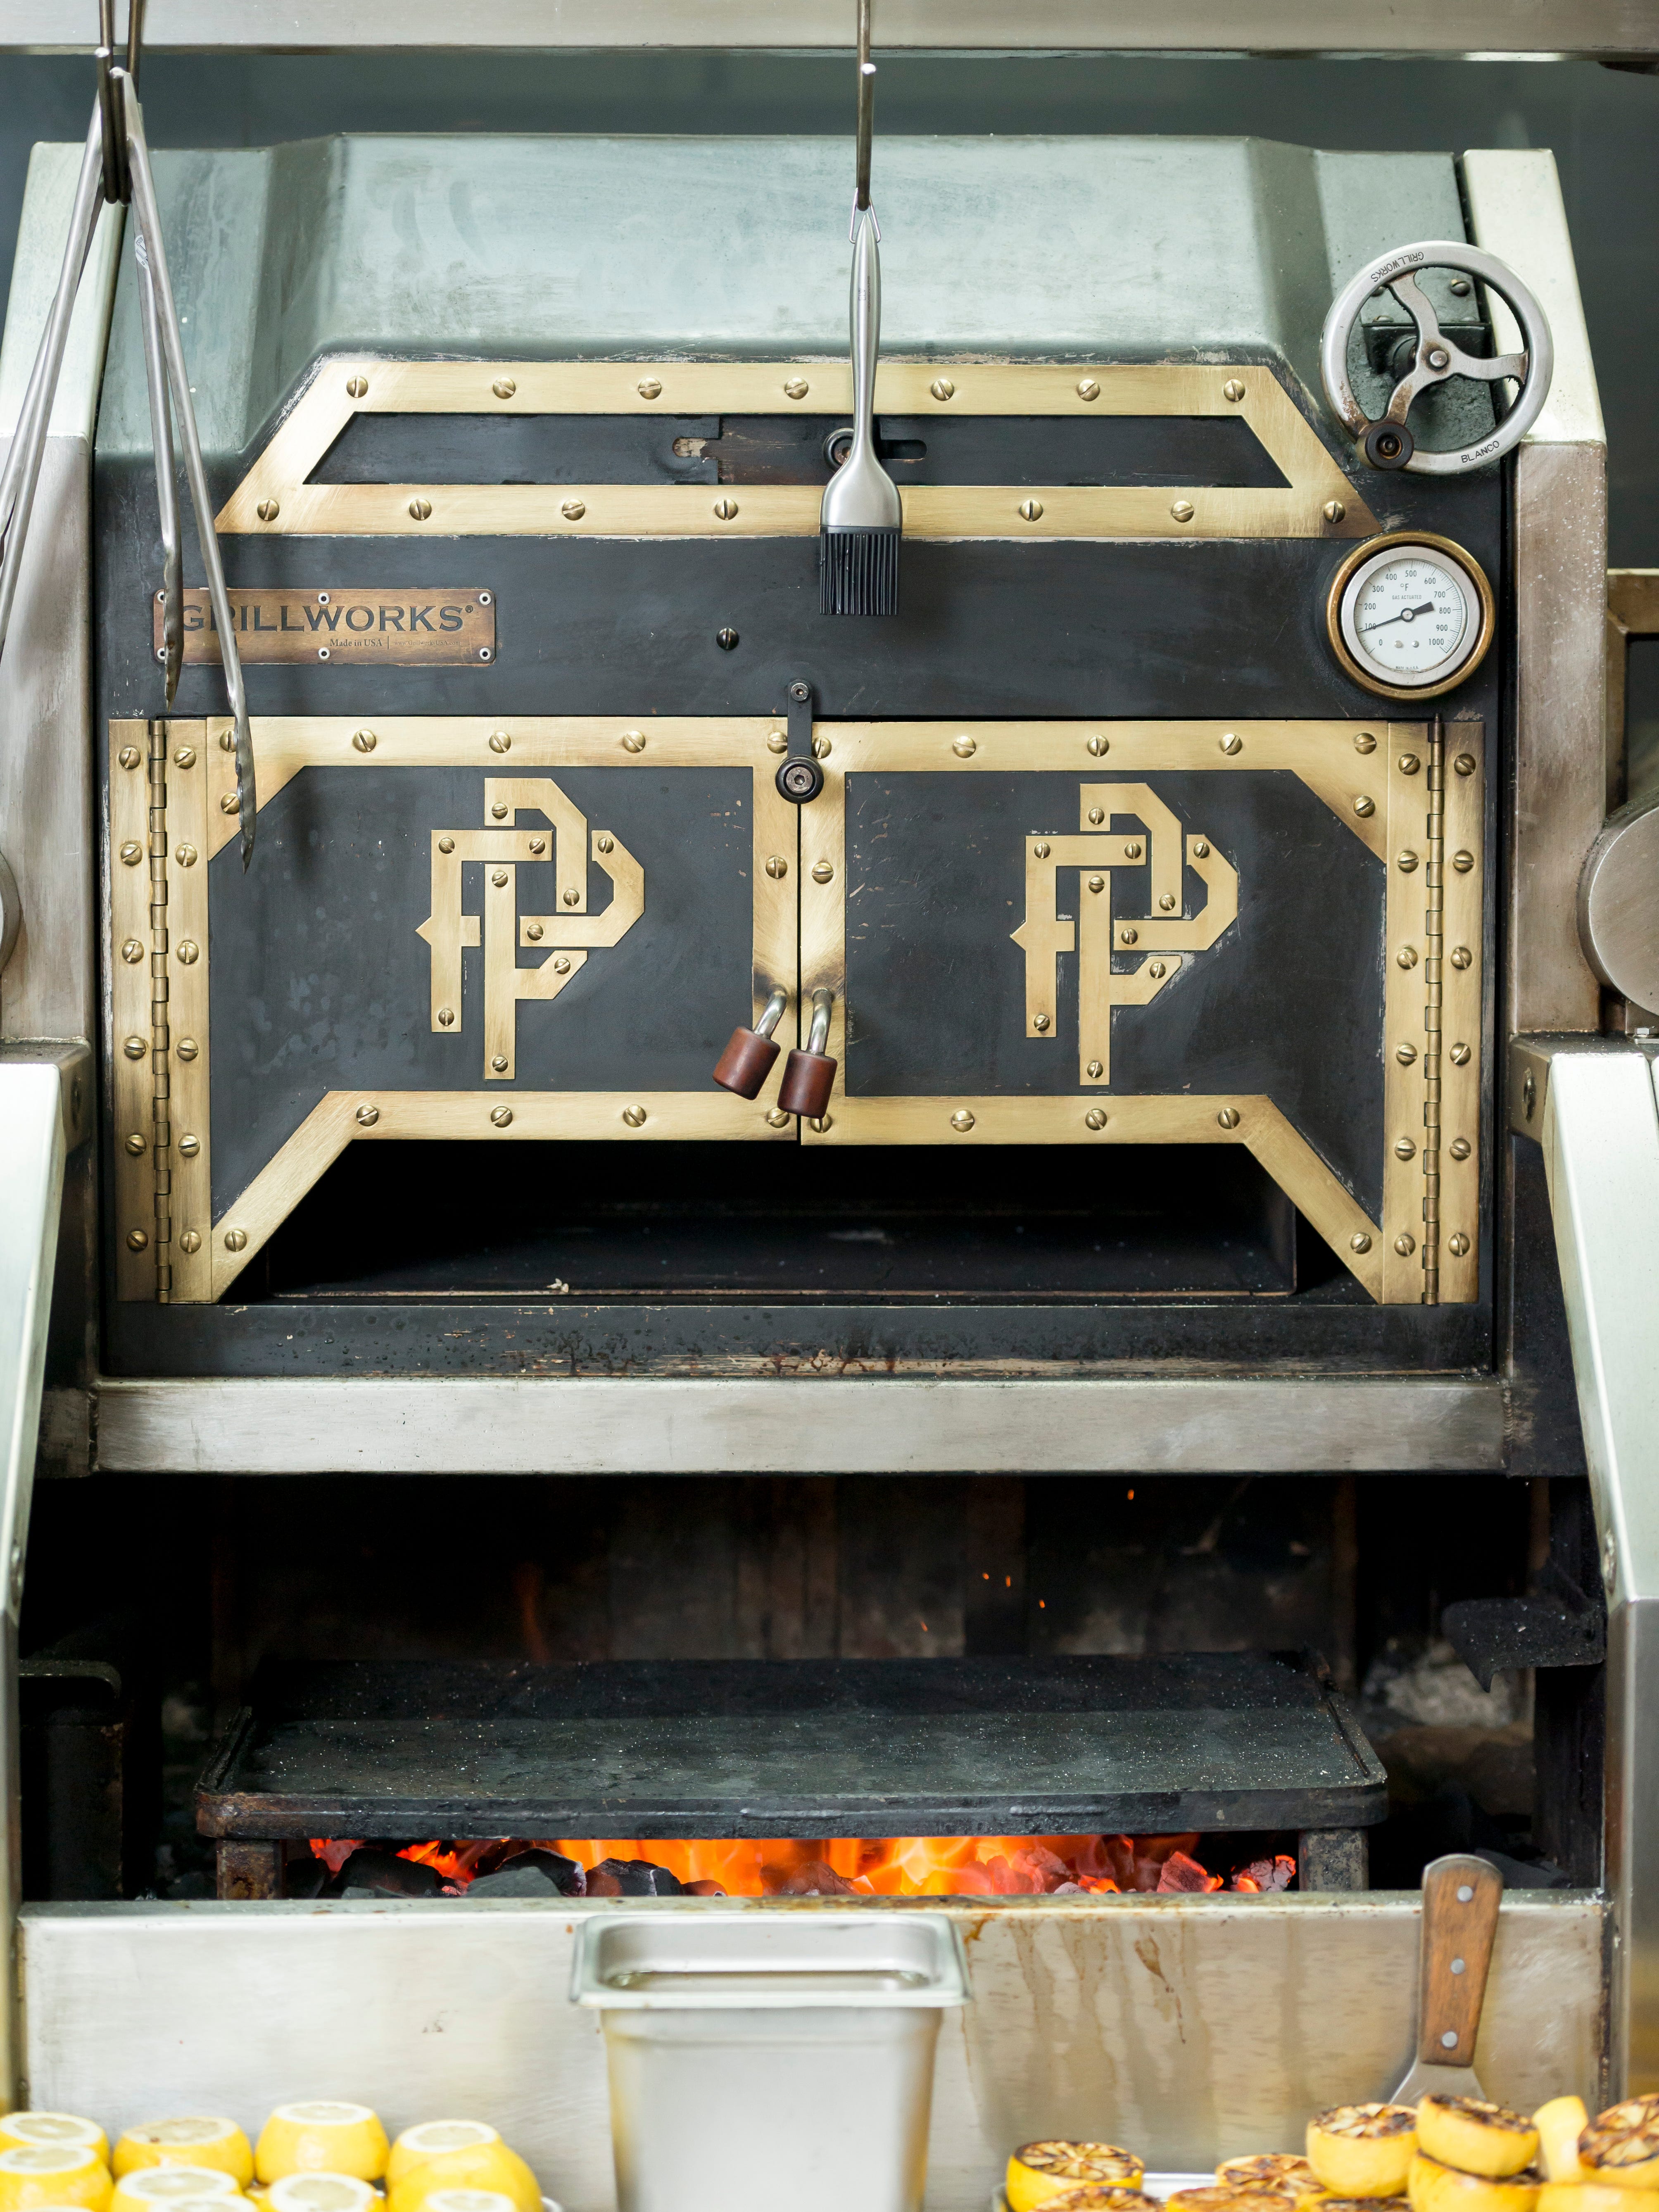 The custom wood fire grill made by Grillworks.